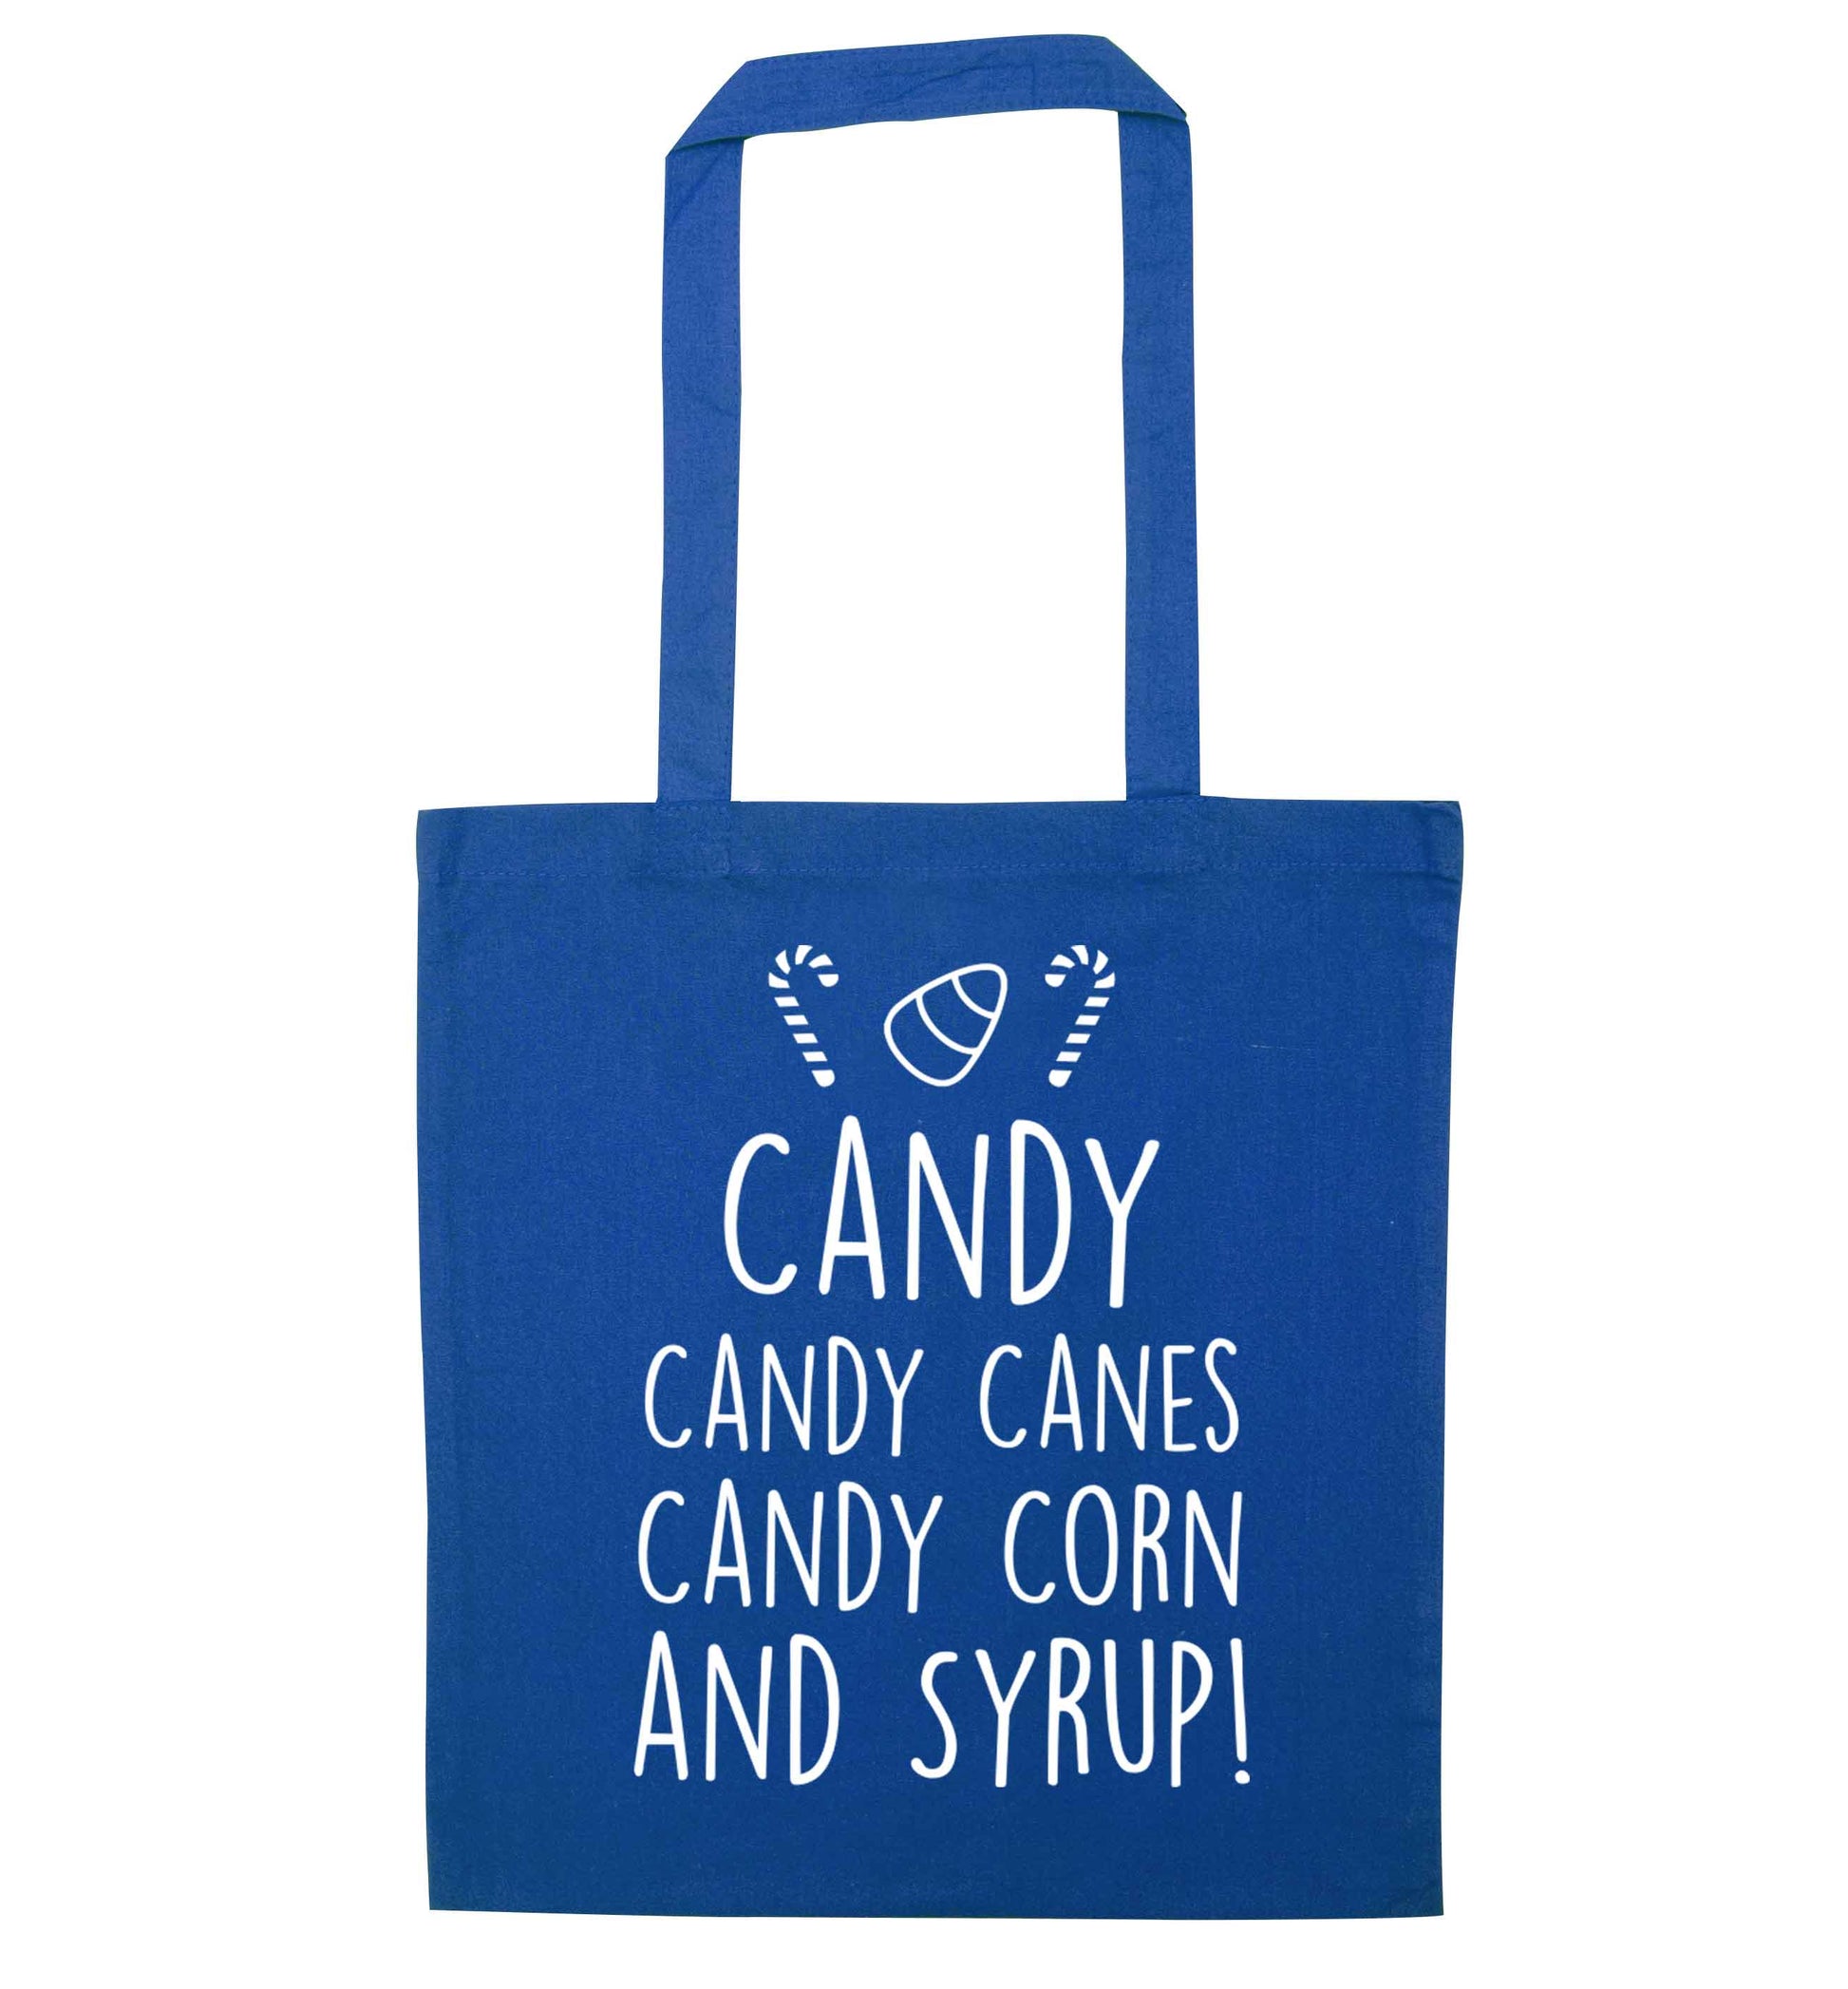 Candy Canes Candy Corns blue tote bag